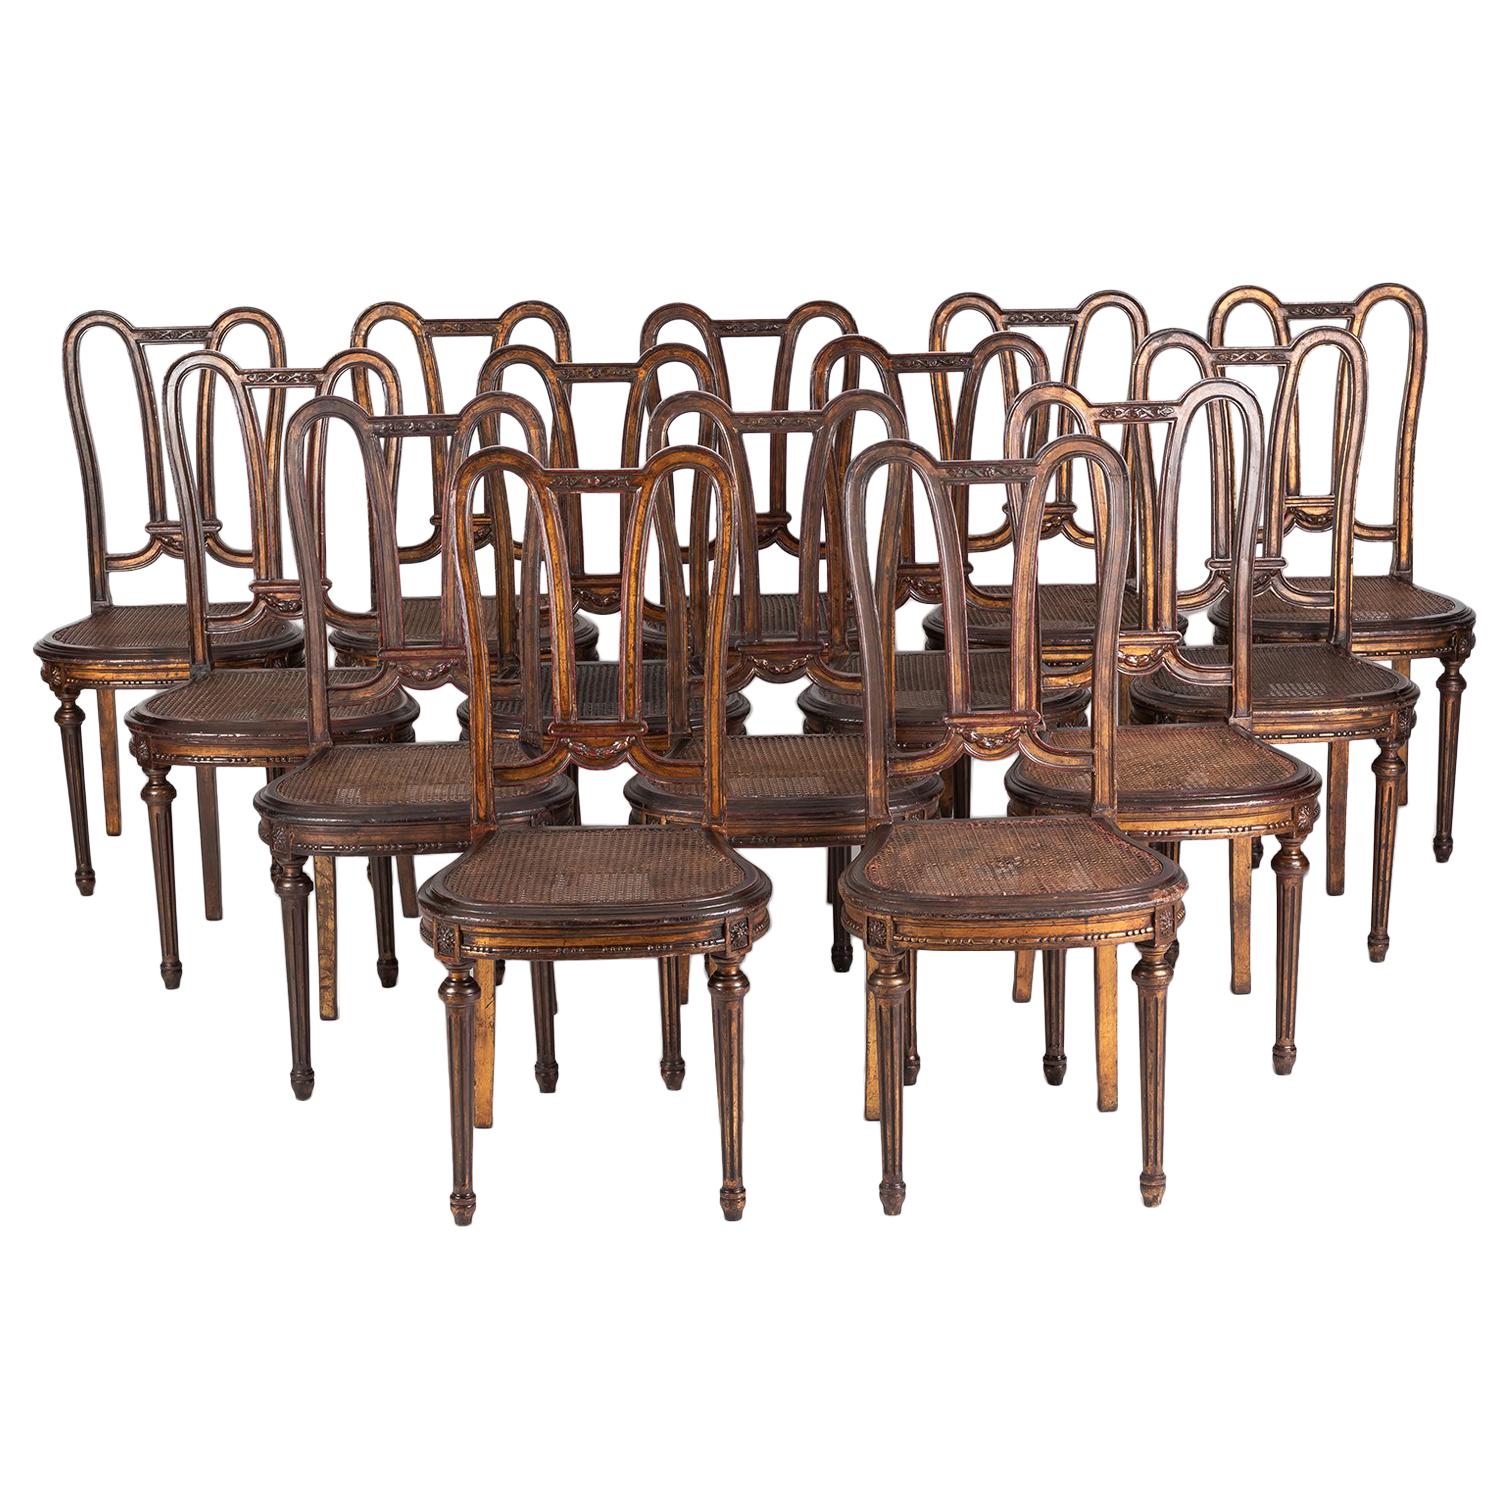 Set of 14 French Style Dining Chairs, Painted Hand Carved Wood with Canned Seats For Sale